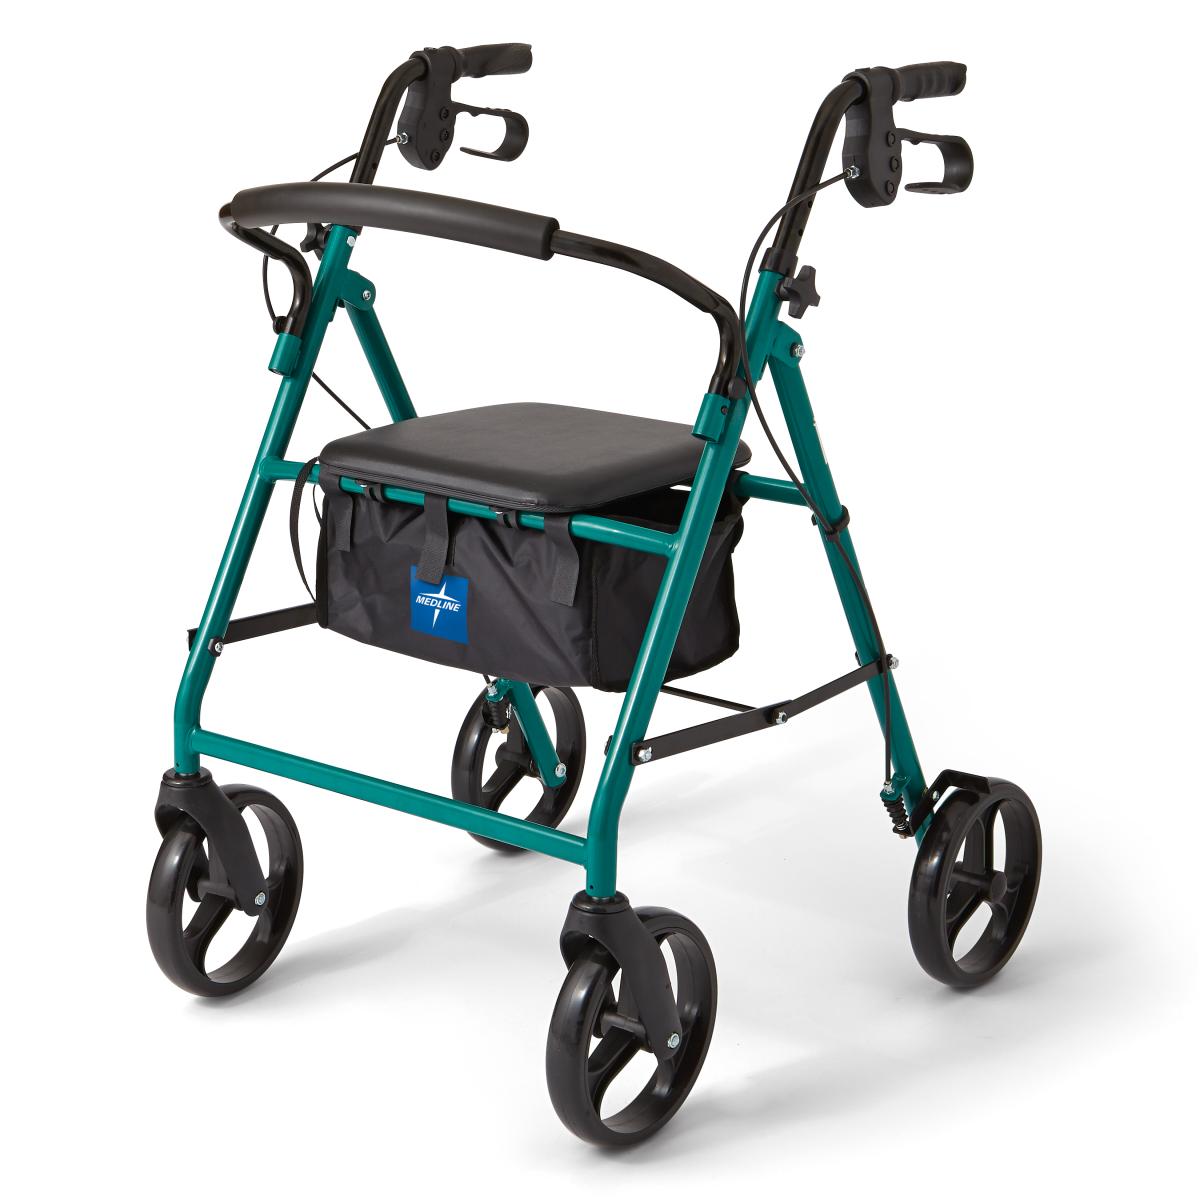 Basic Adult Steel Rollator with 8" Wheels